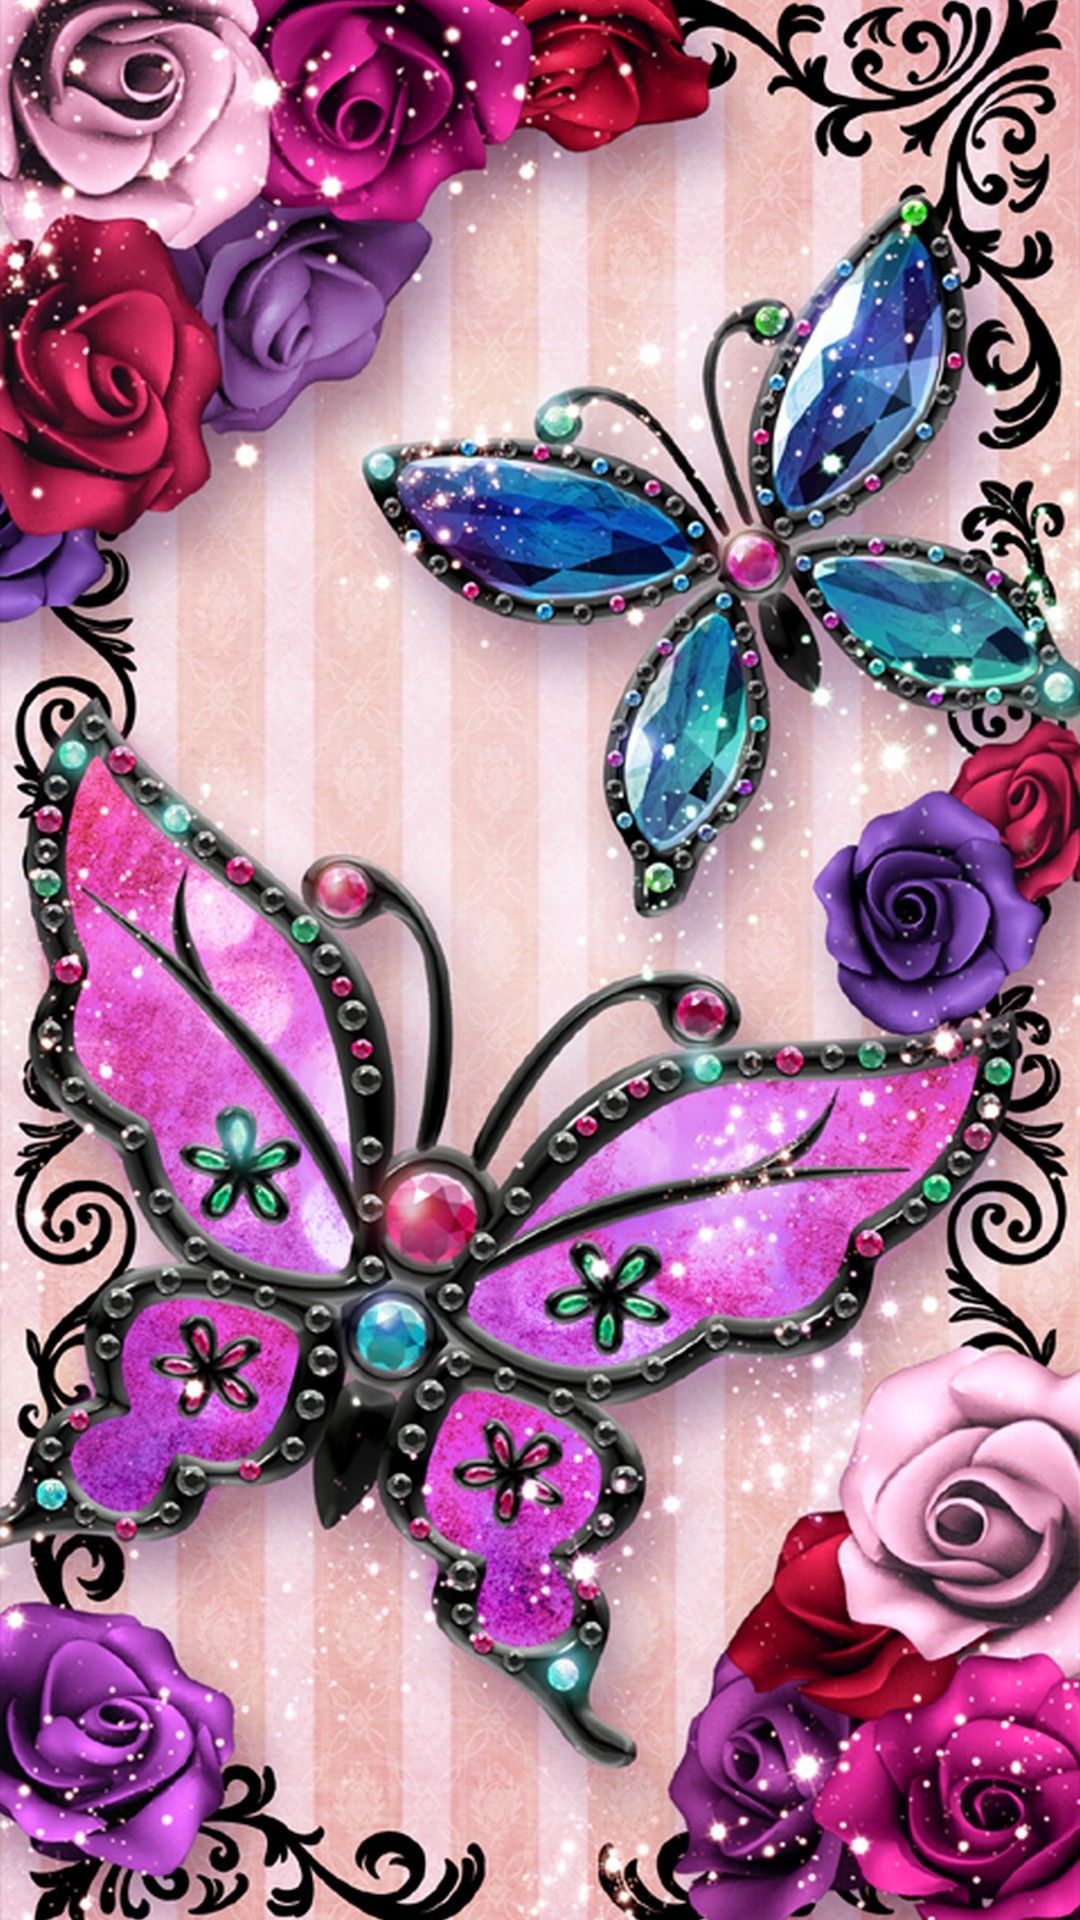 Butterfly Iphone Wallpapers Wallpaper Cave